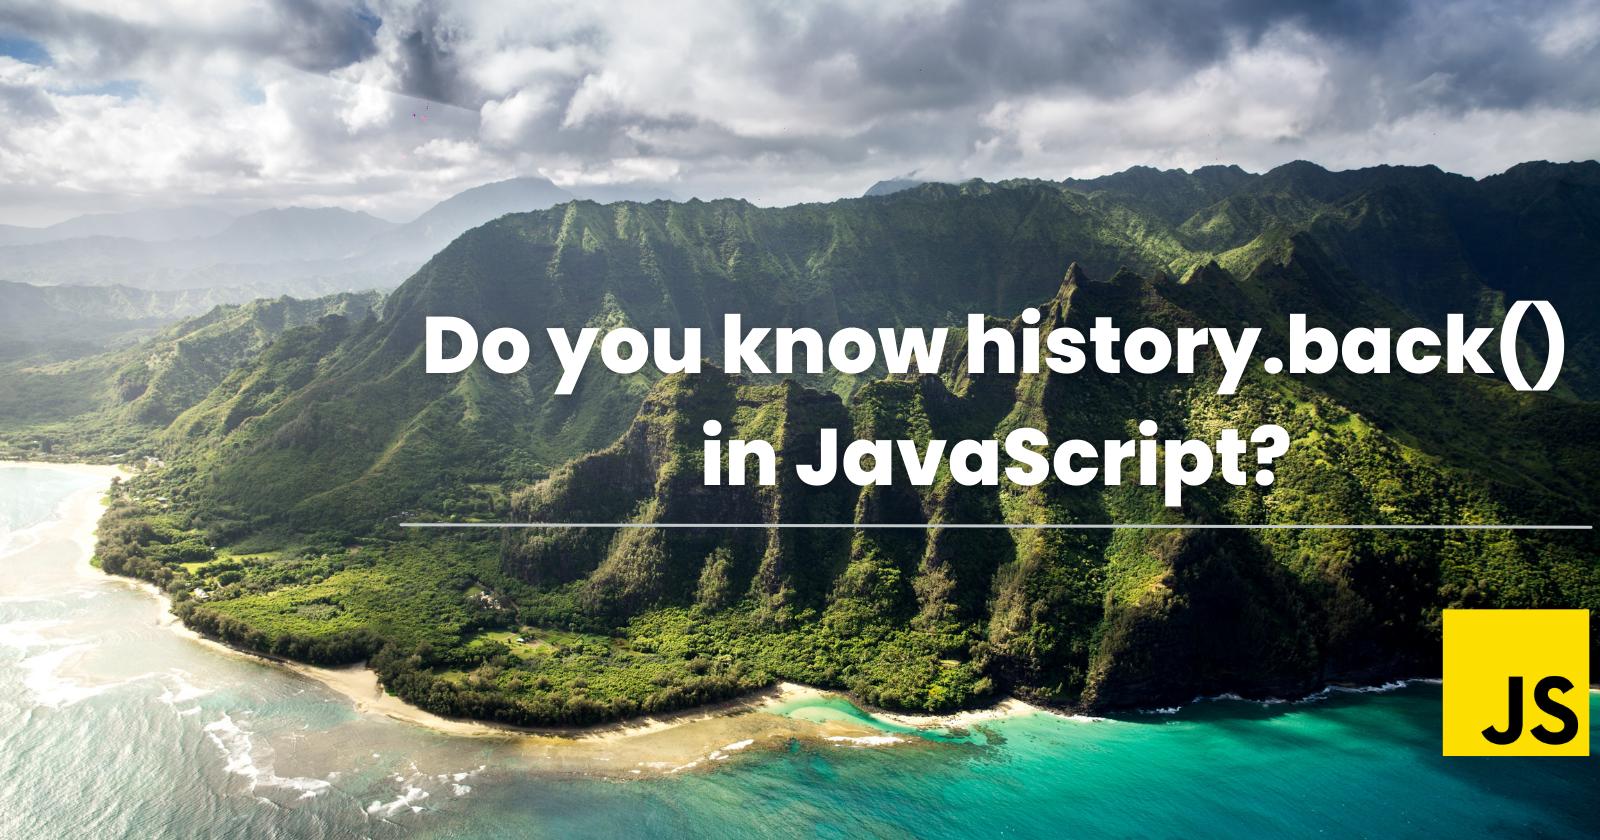 Do you know history.back() in JavaScript?